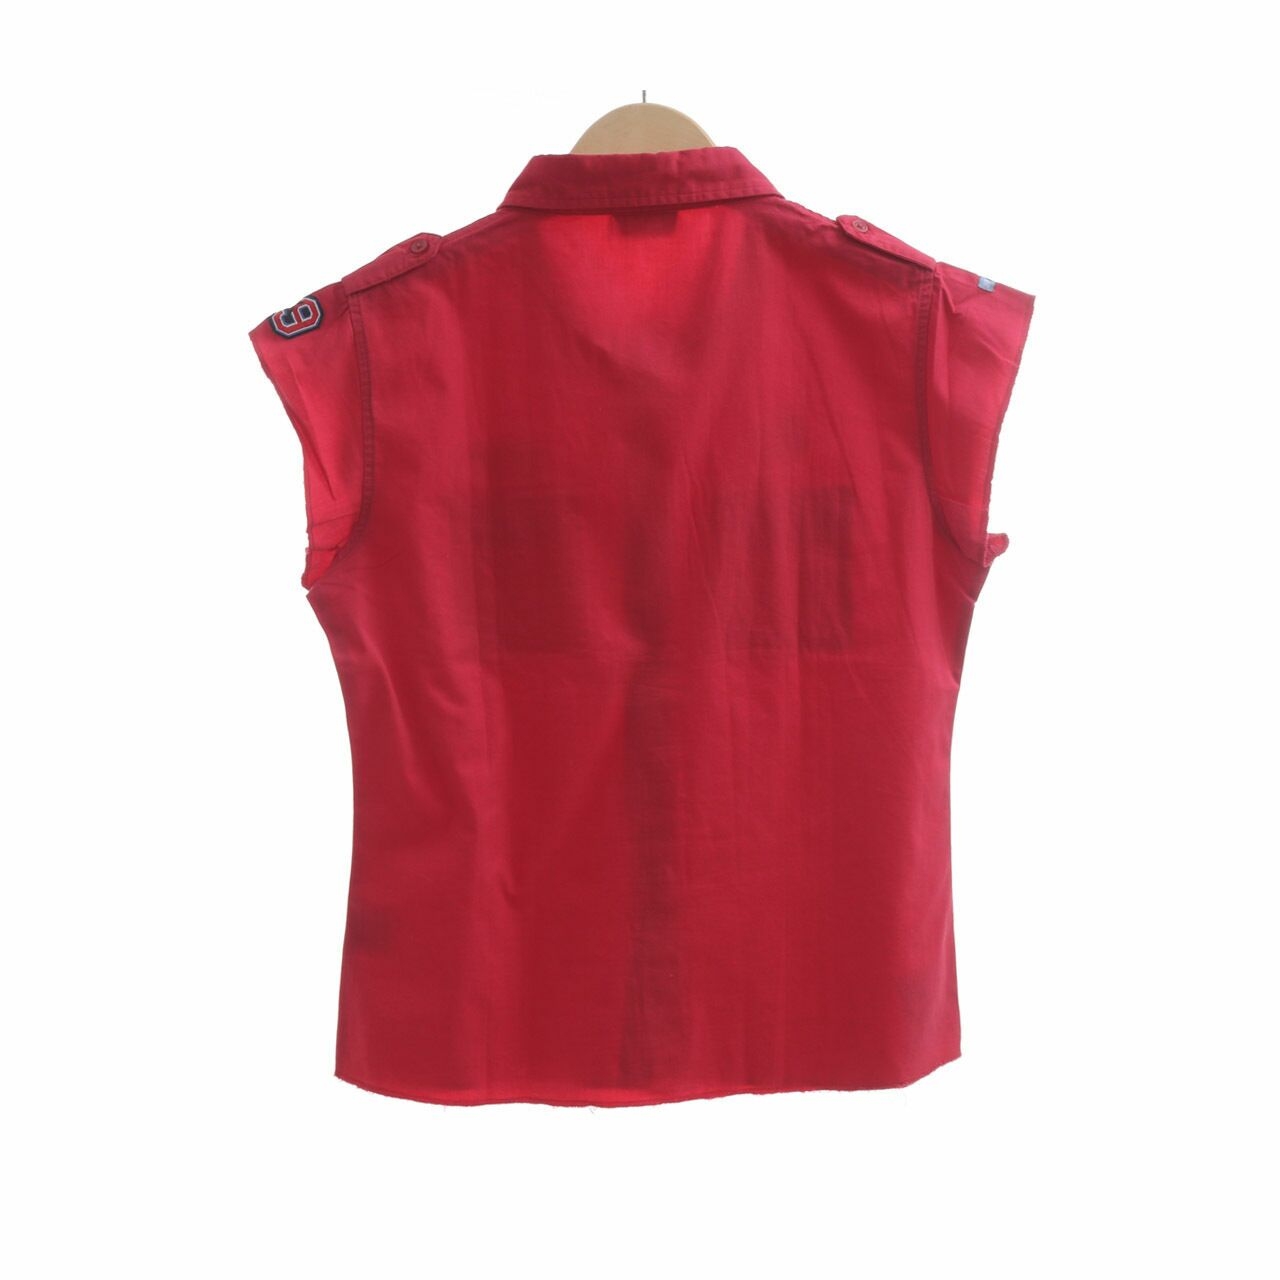 RIP CURL Pink Coral Applique Sleeveless